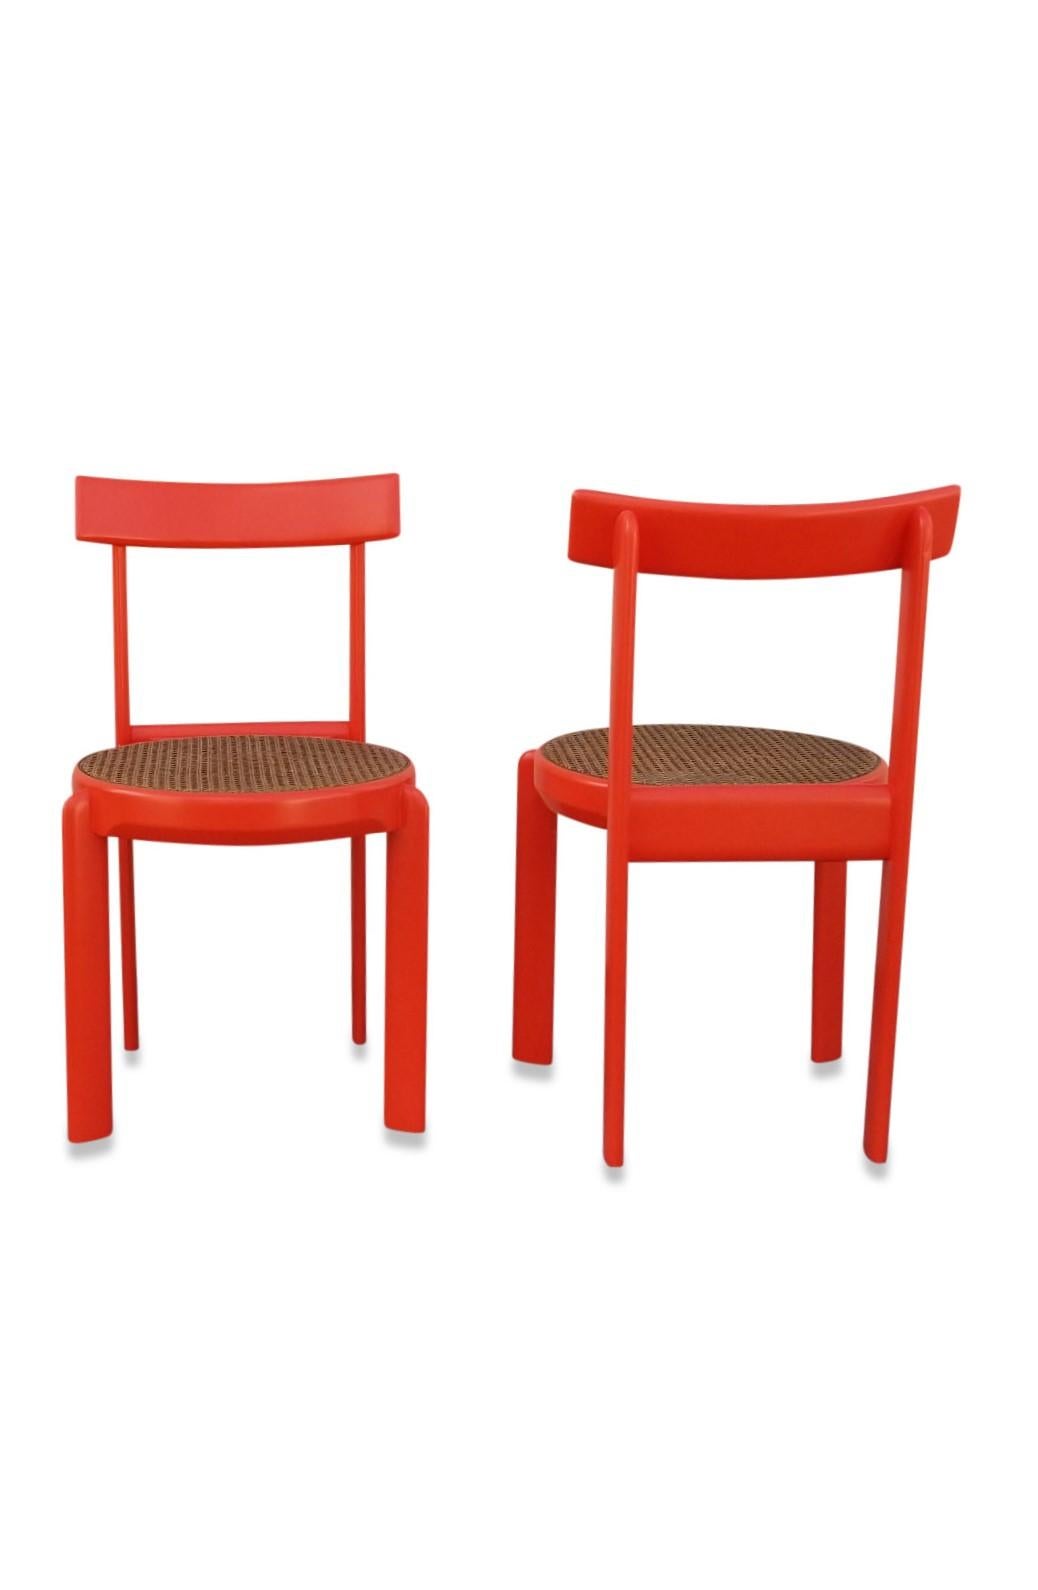 Unusual Set of two Caning and Orange Lacquer Chairs, France, 1970s